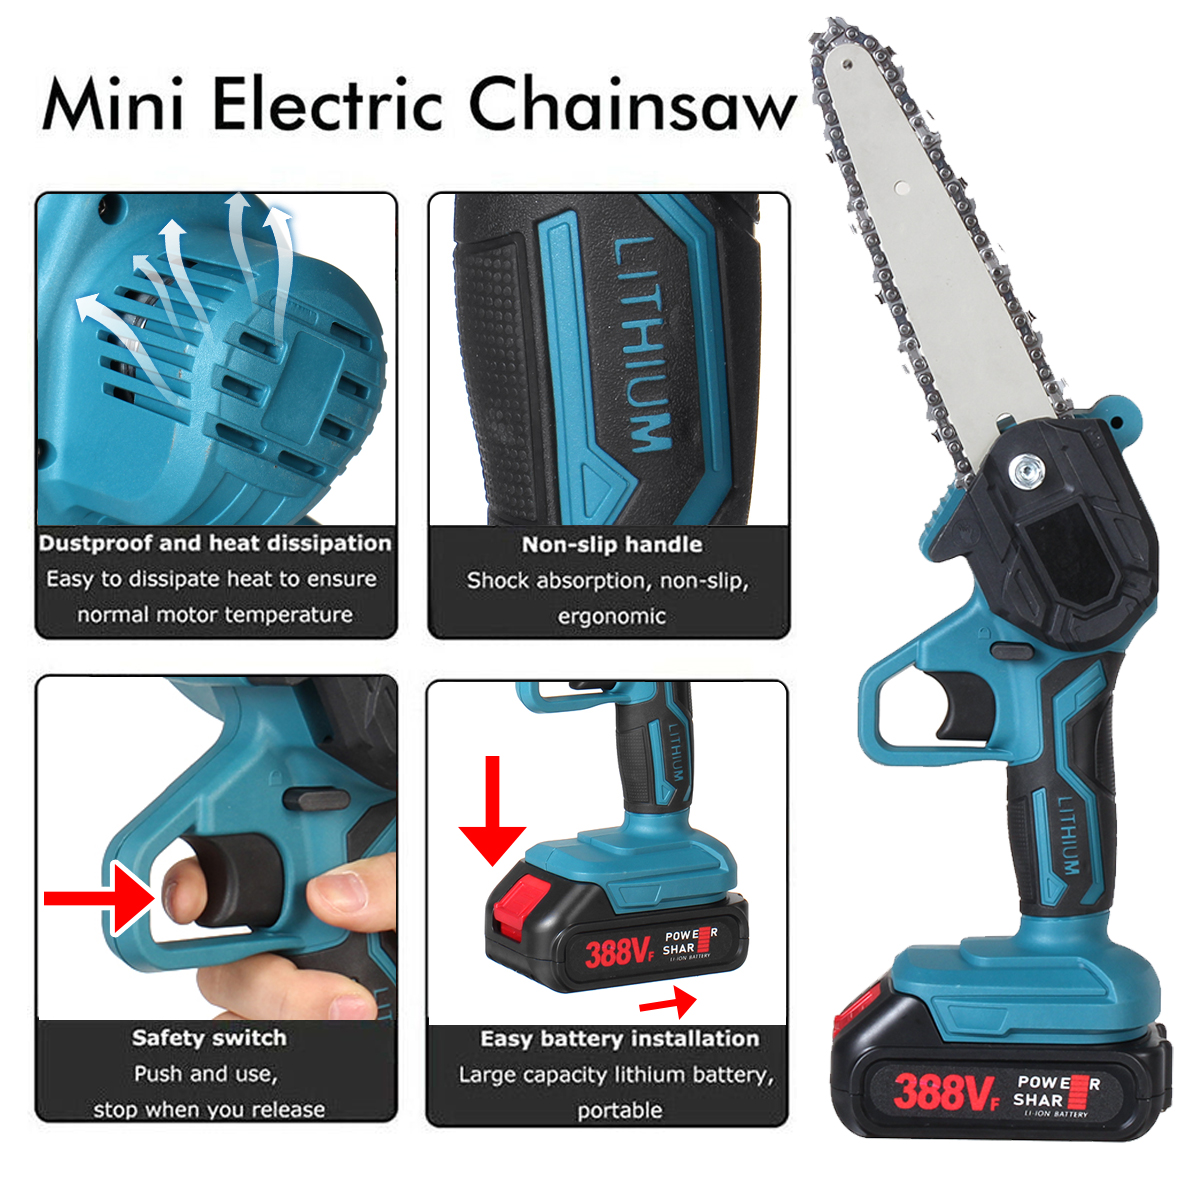 6-Inch-Mini-Cordless-Electric-Chainsaw-Woodworking-Wood-Cutter-Rechargeable-Portable-Chain-Saw-W-Non-1863317-13